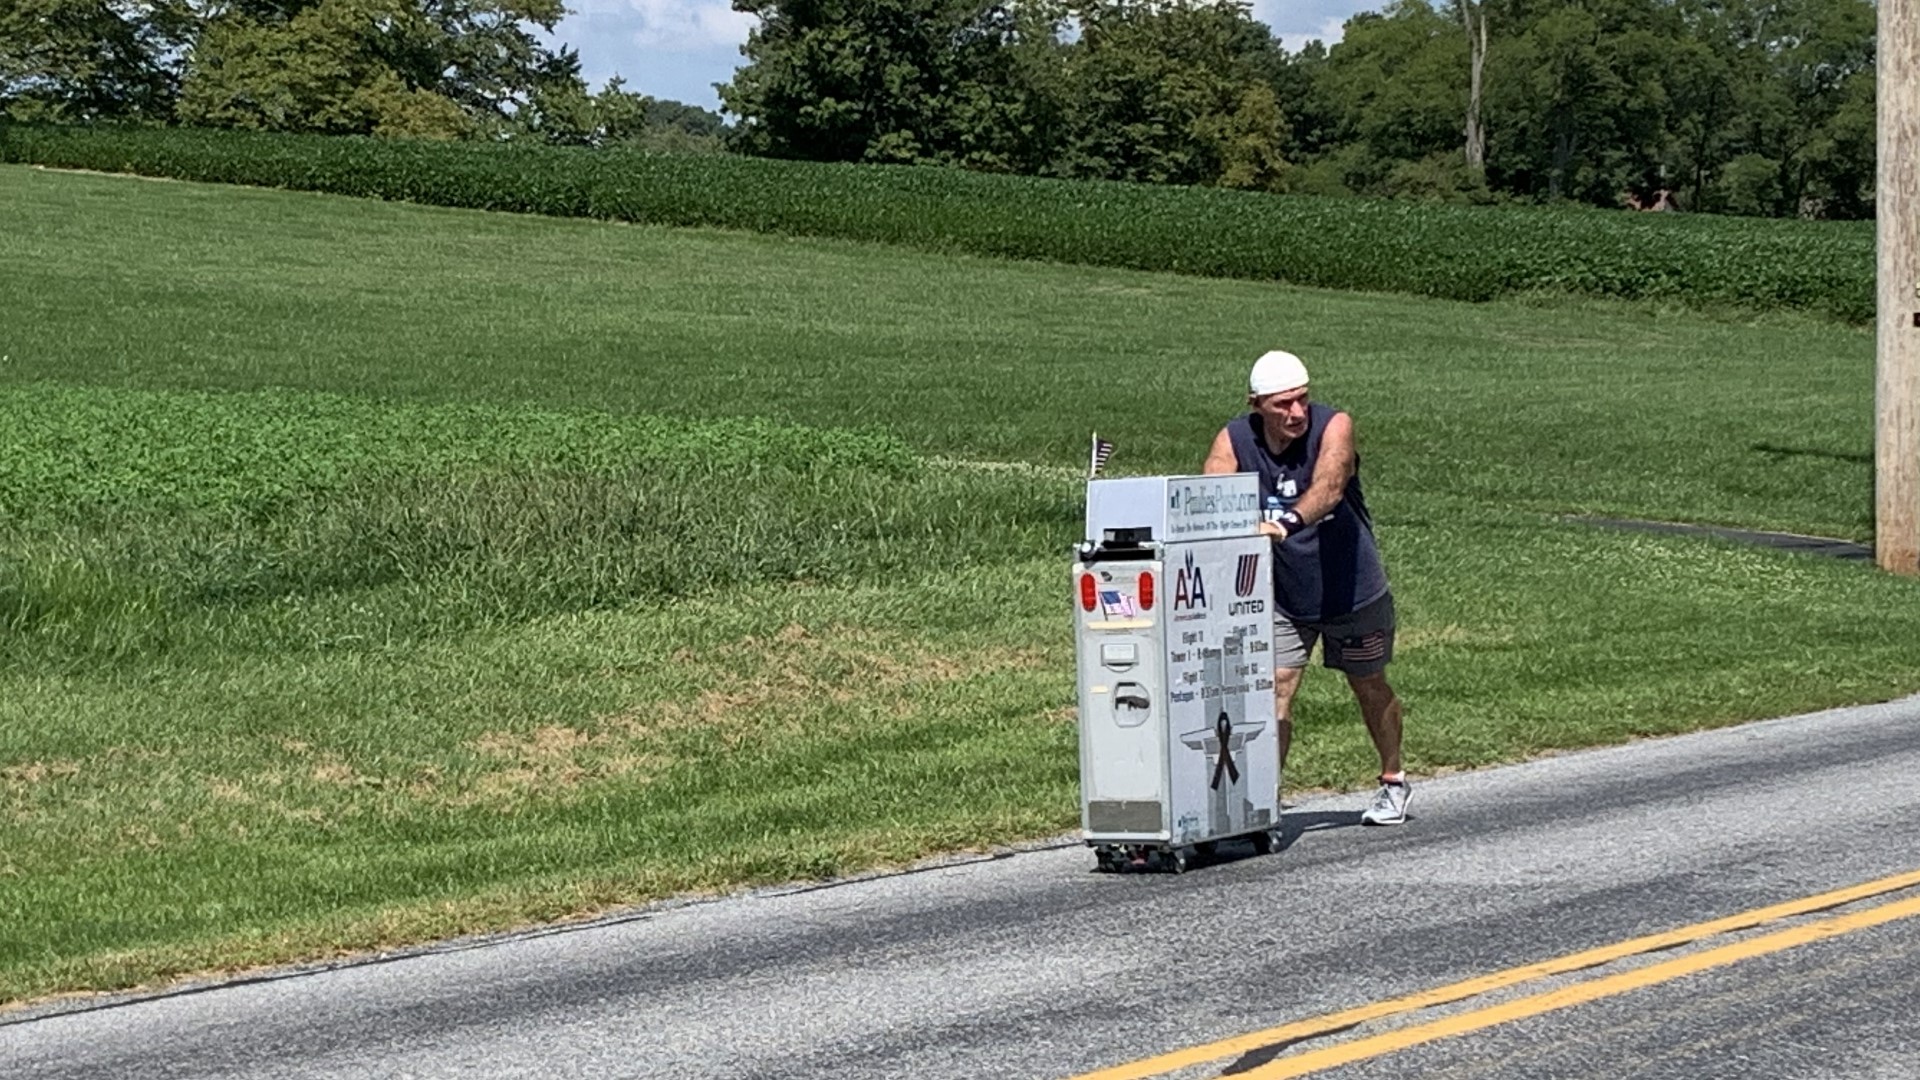 Paulie Veneto is pushing his cart from Newark, New Jersey to Shanksville, Pennsylvania to honor the flight attendants and passengers who died on 9/11.